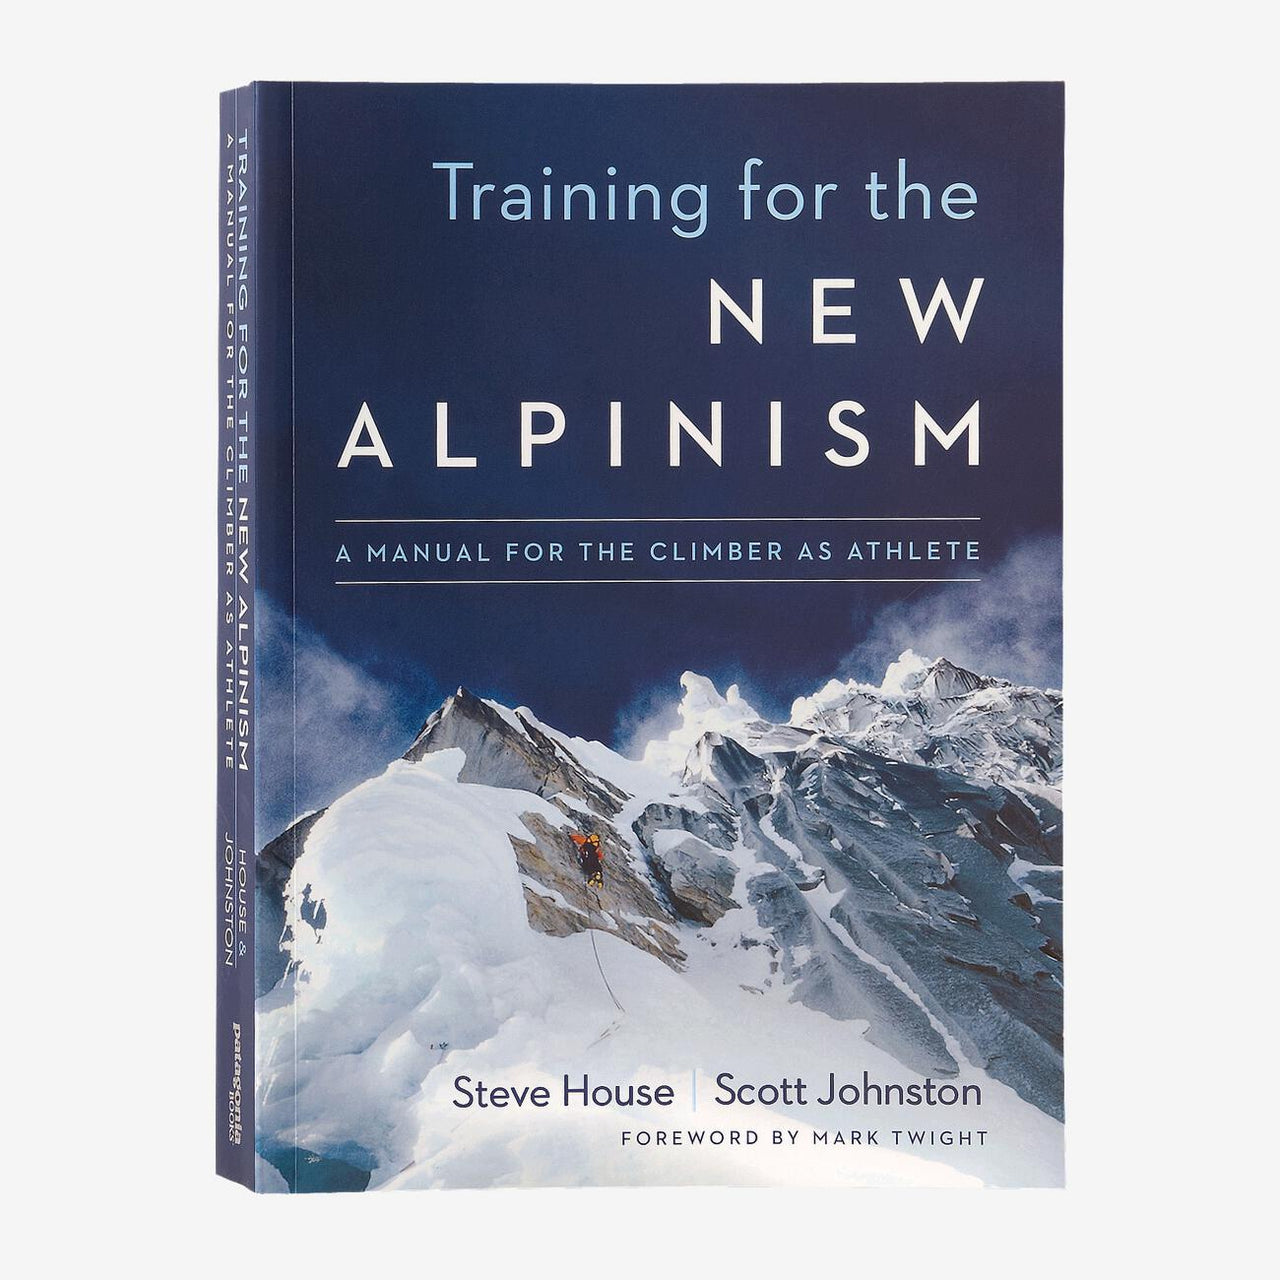 Training for the New Alpinism: A Manual for the Climber as Athlete by Steve House and Scott Johnston BK695